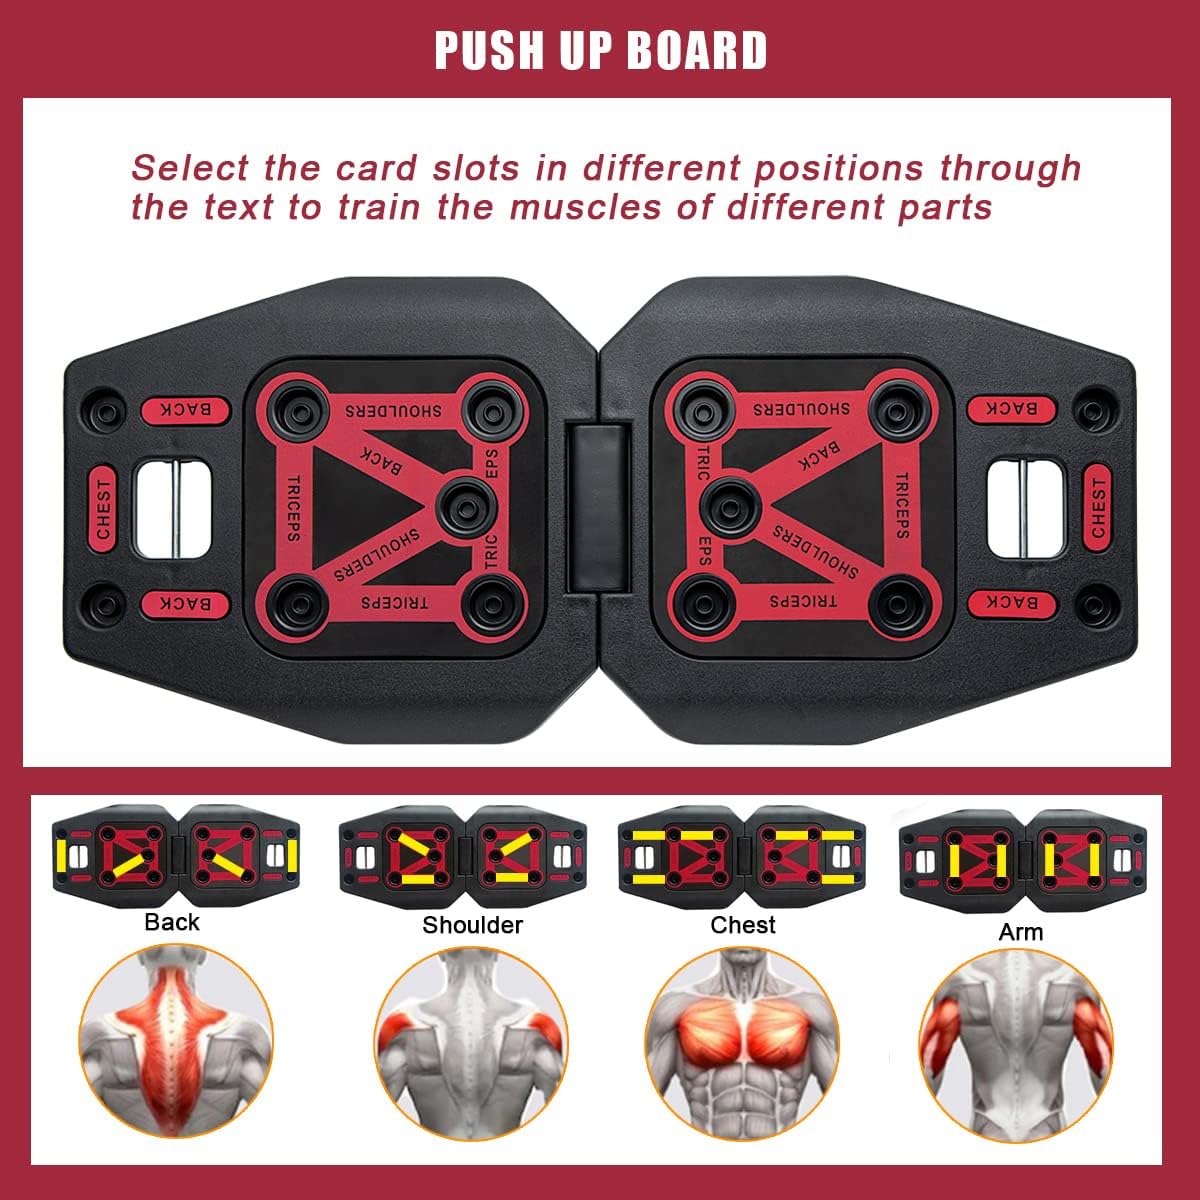 THE GREATEST Home Gym Exercise Equipment - Portable Workout System 17 Fitness Accessories 9 in1 Push Up Board Set, Resistance Bands with Pilates Bar Strength Training Abs Shoulders Back Butt